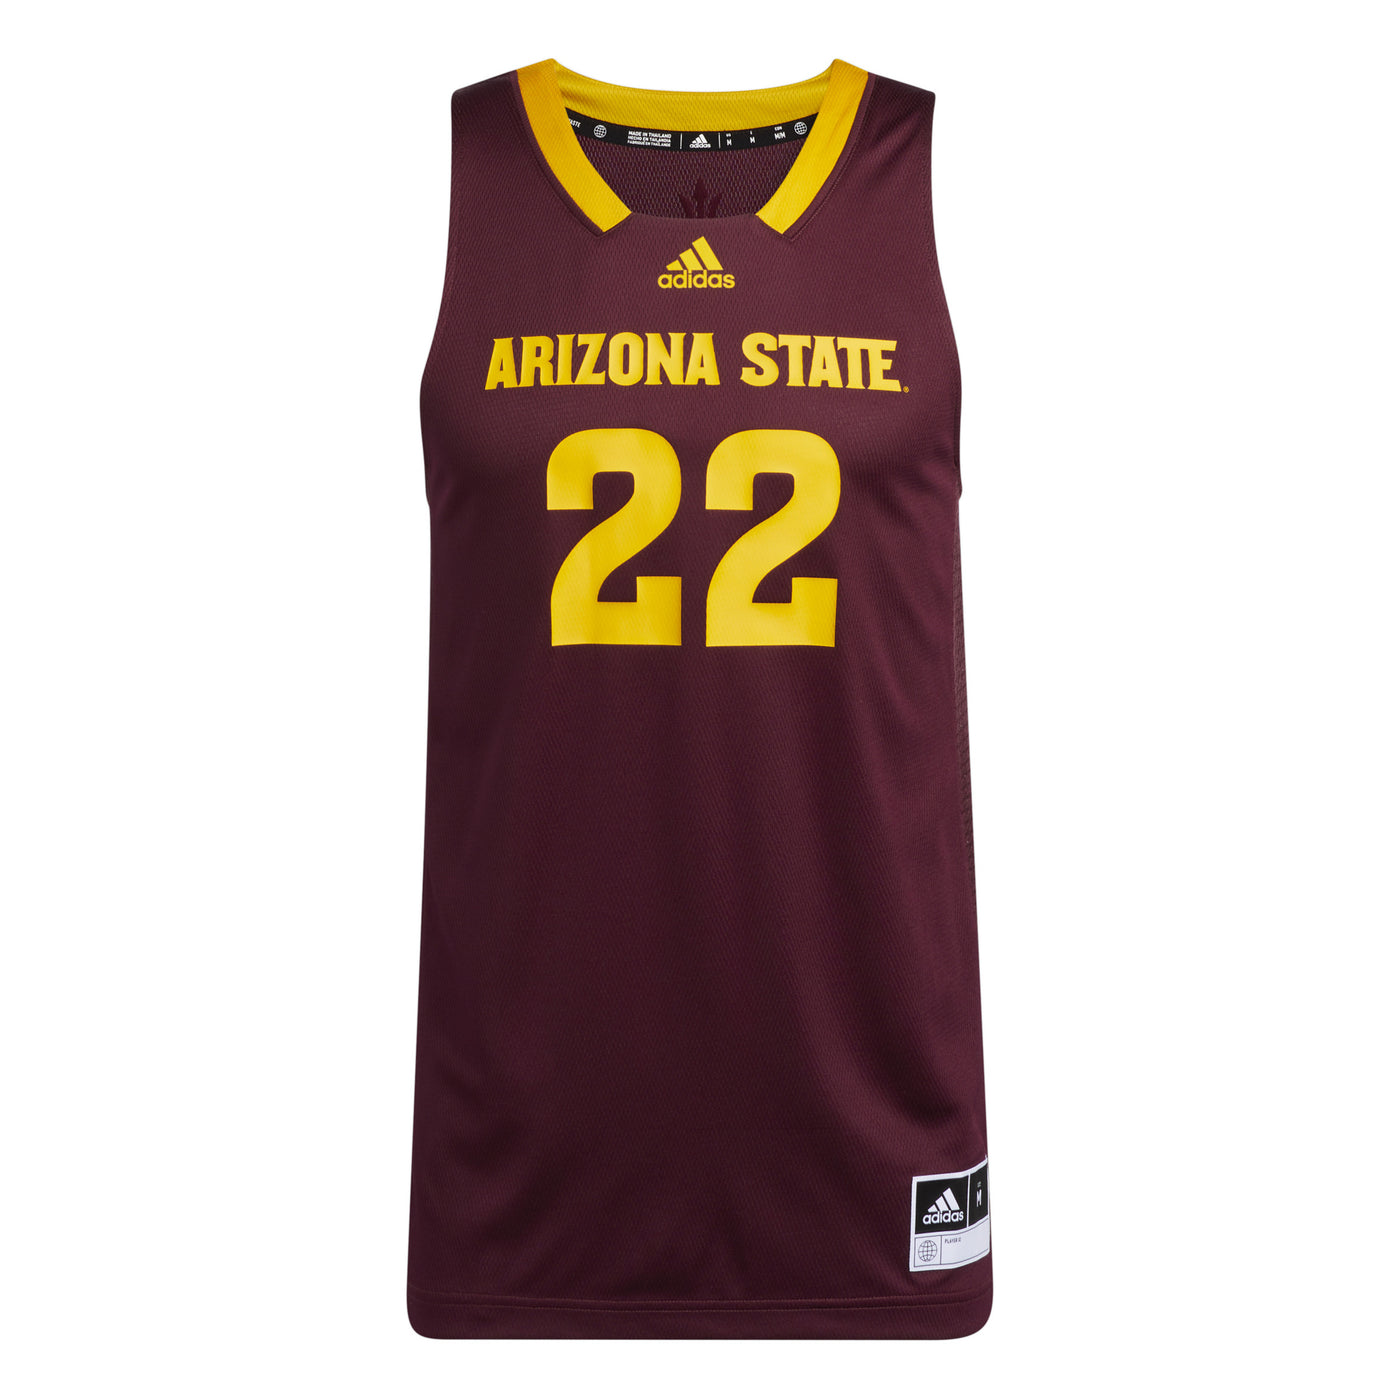 ASU maroon basketball jersey with gold trim on the neckline. The text 